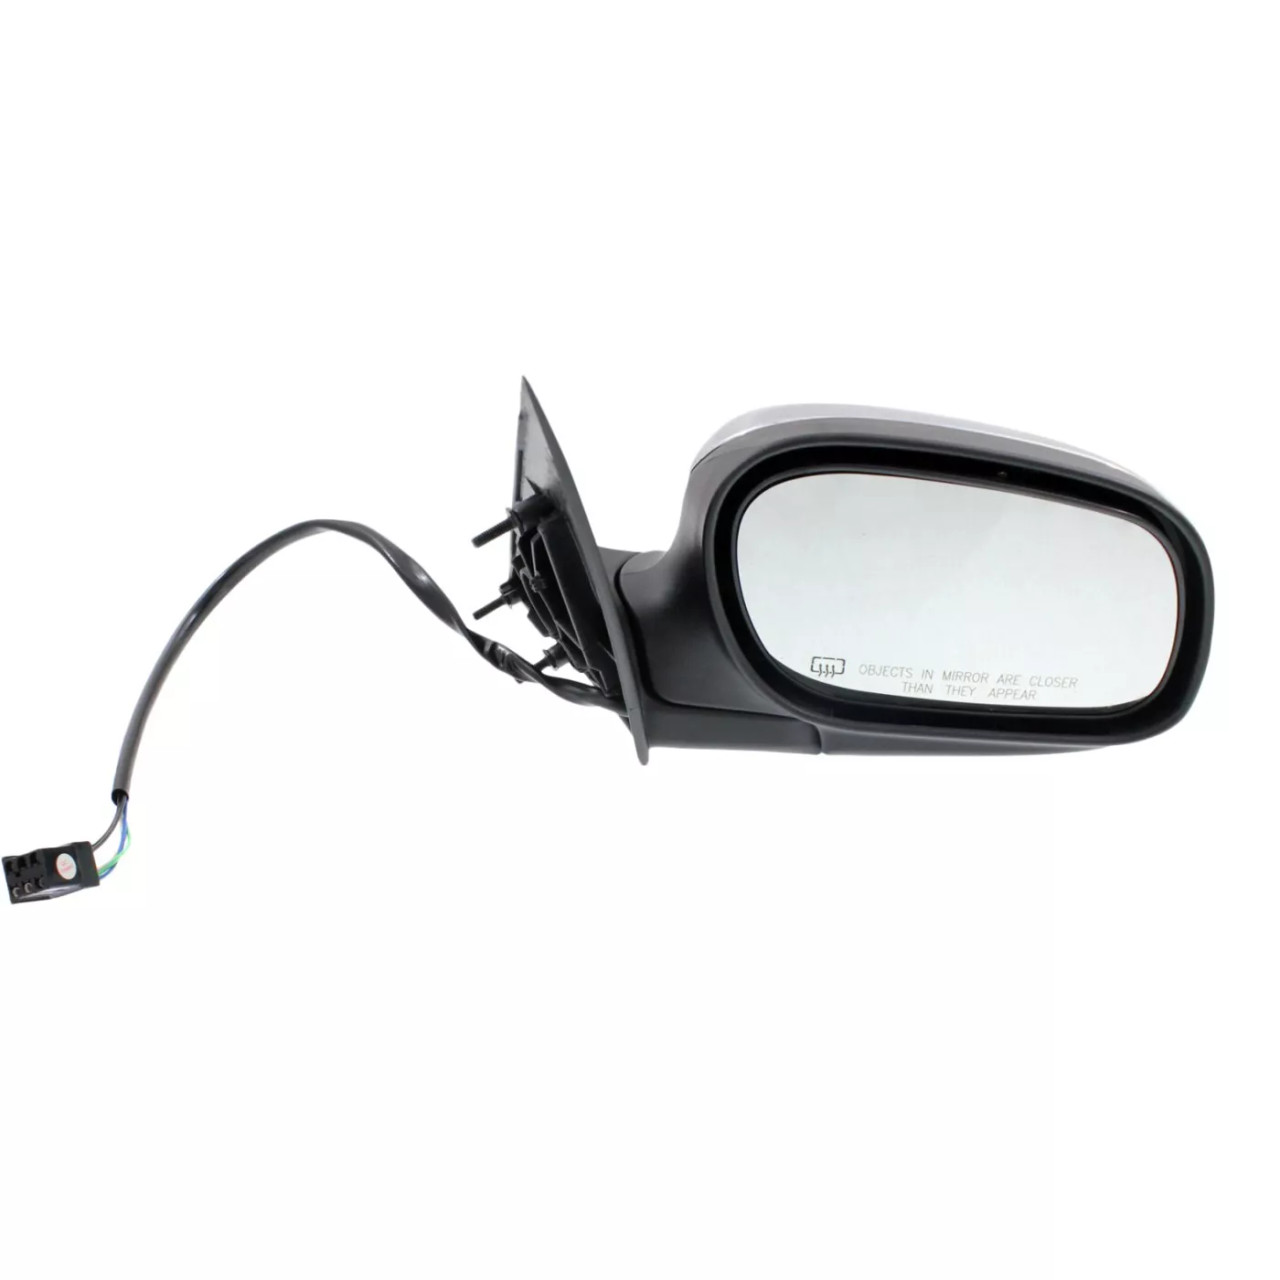 Mirror Set Of 2 For 2002-2008 Ford Crown Victoria Chrome Left And Right Heated